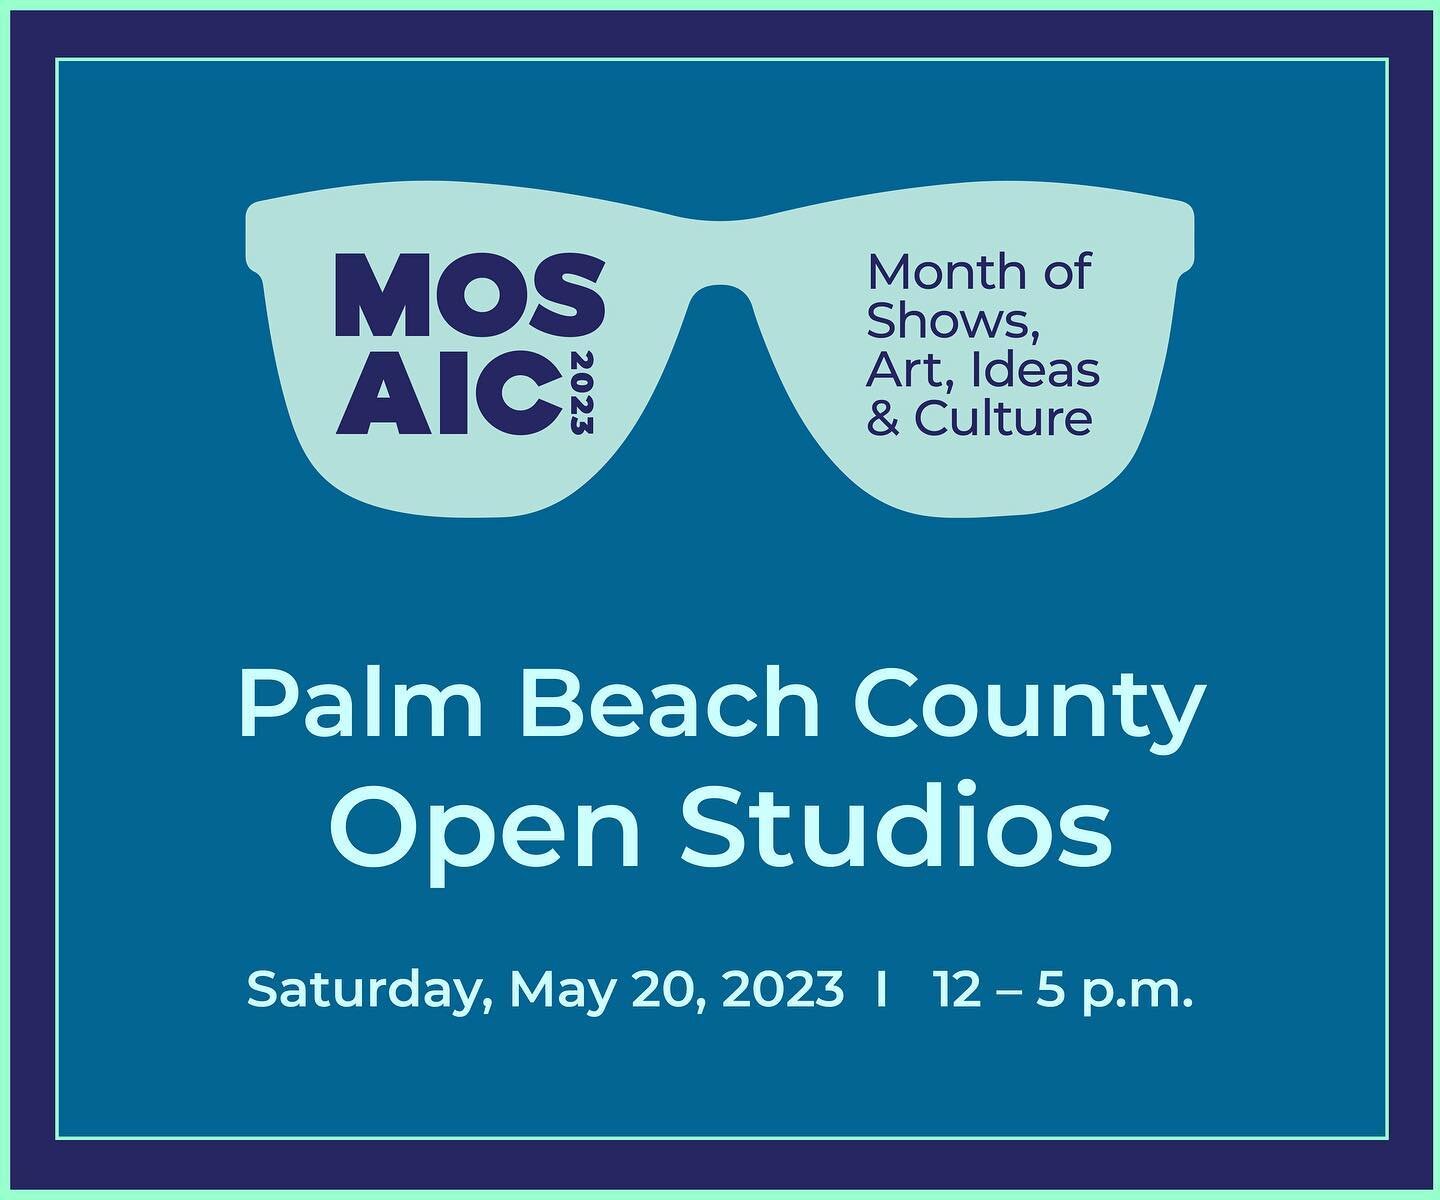 ‼️‼️‼️‼️
Eager to see what goes on inside my studio? On May 20, I&rsquo;m inviting you to come see it as part of Palm Beach County Open Studios from 12-5 p.m. See other participating artists at mosaicpbc.com! #mosaicpbc #palmbeachculture